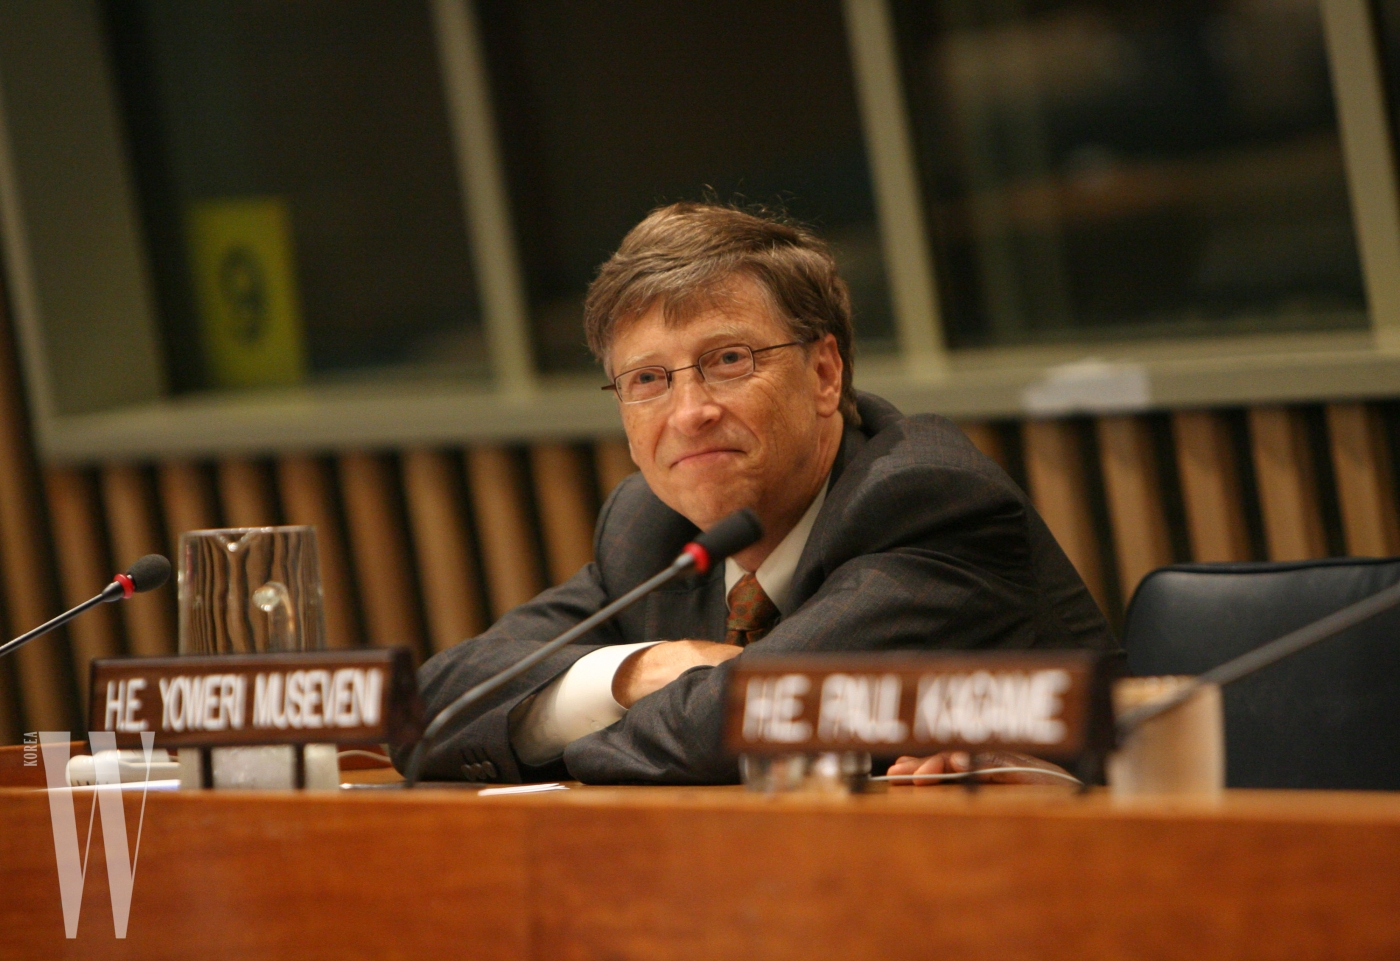 Bill Gates And African Leaders Launch Joint Initiative At UN